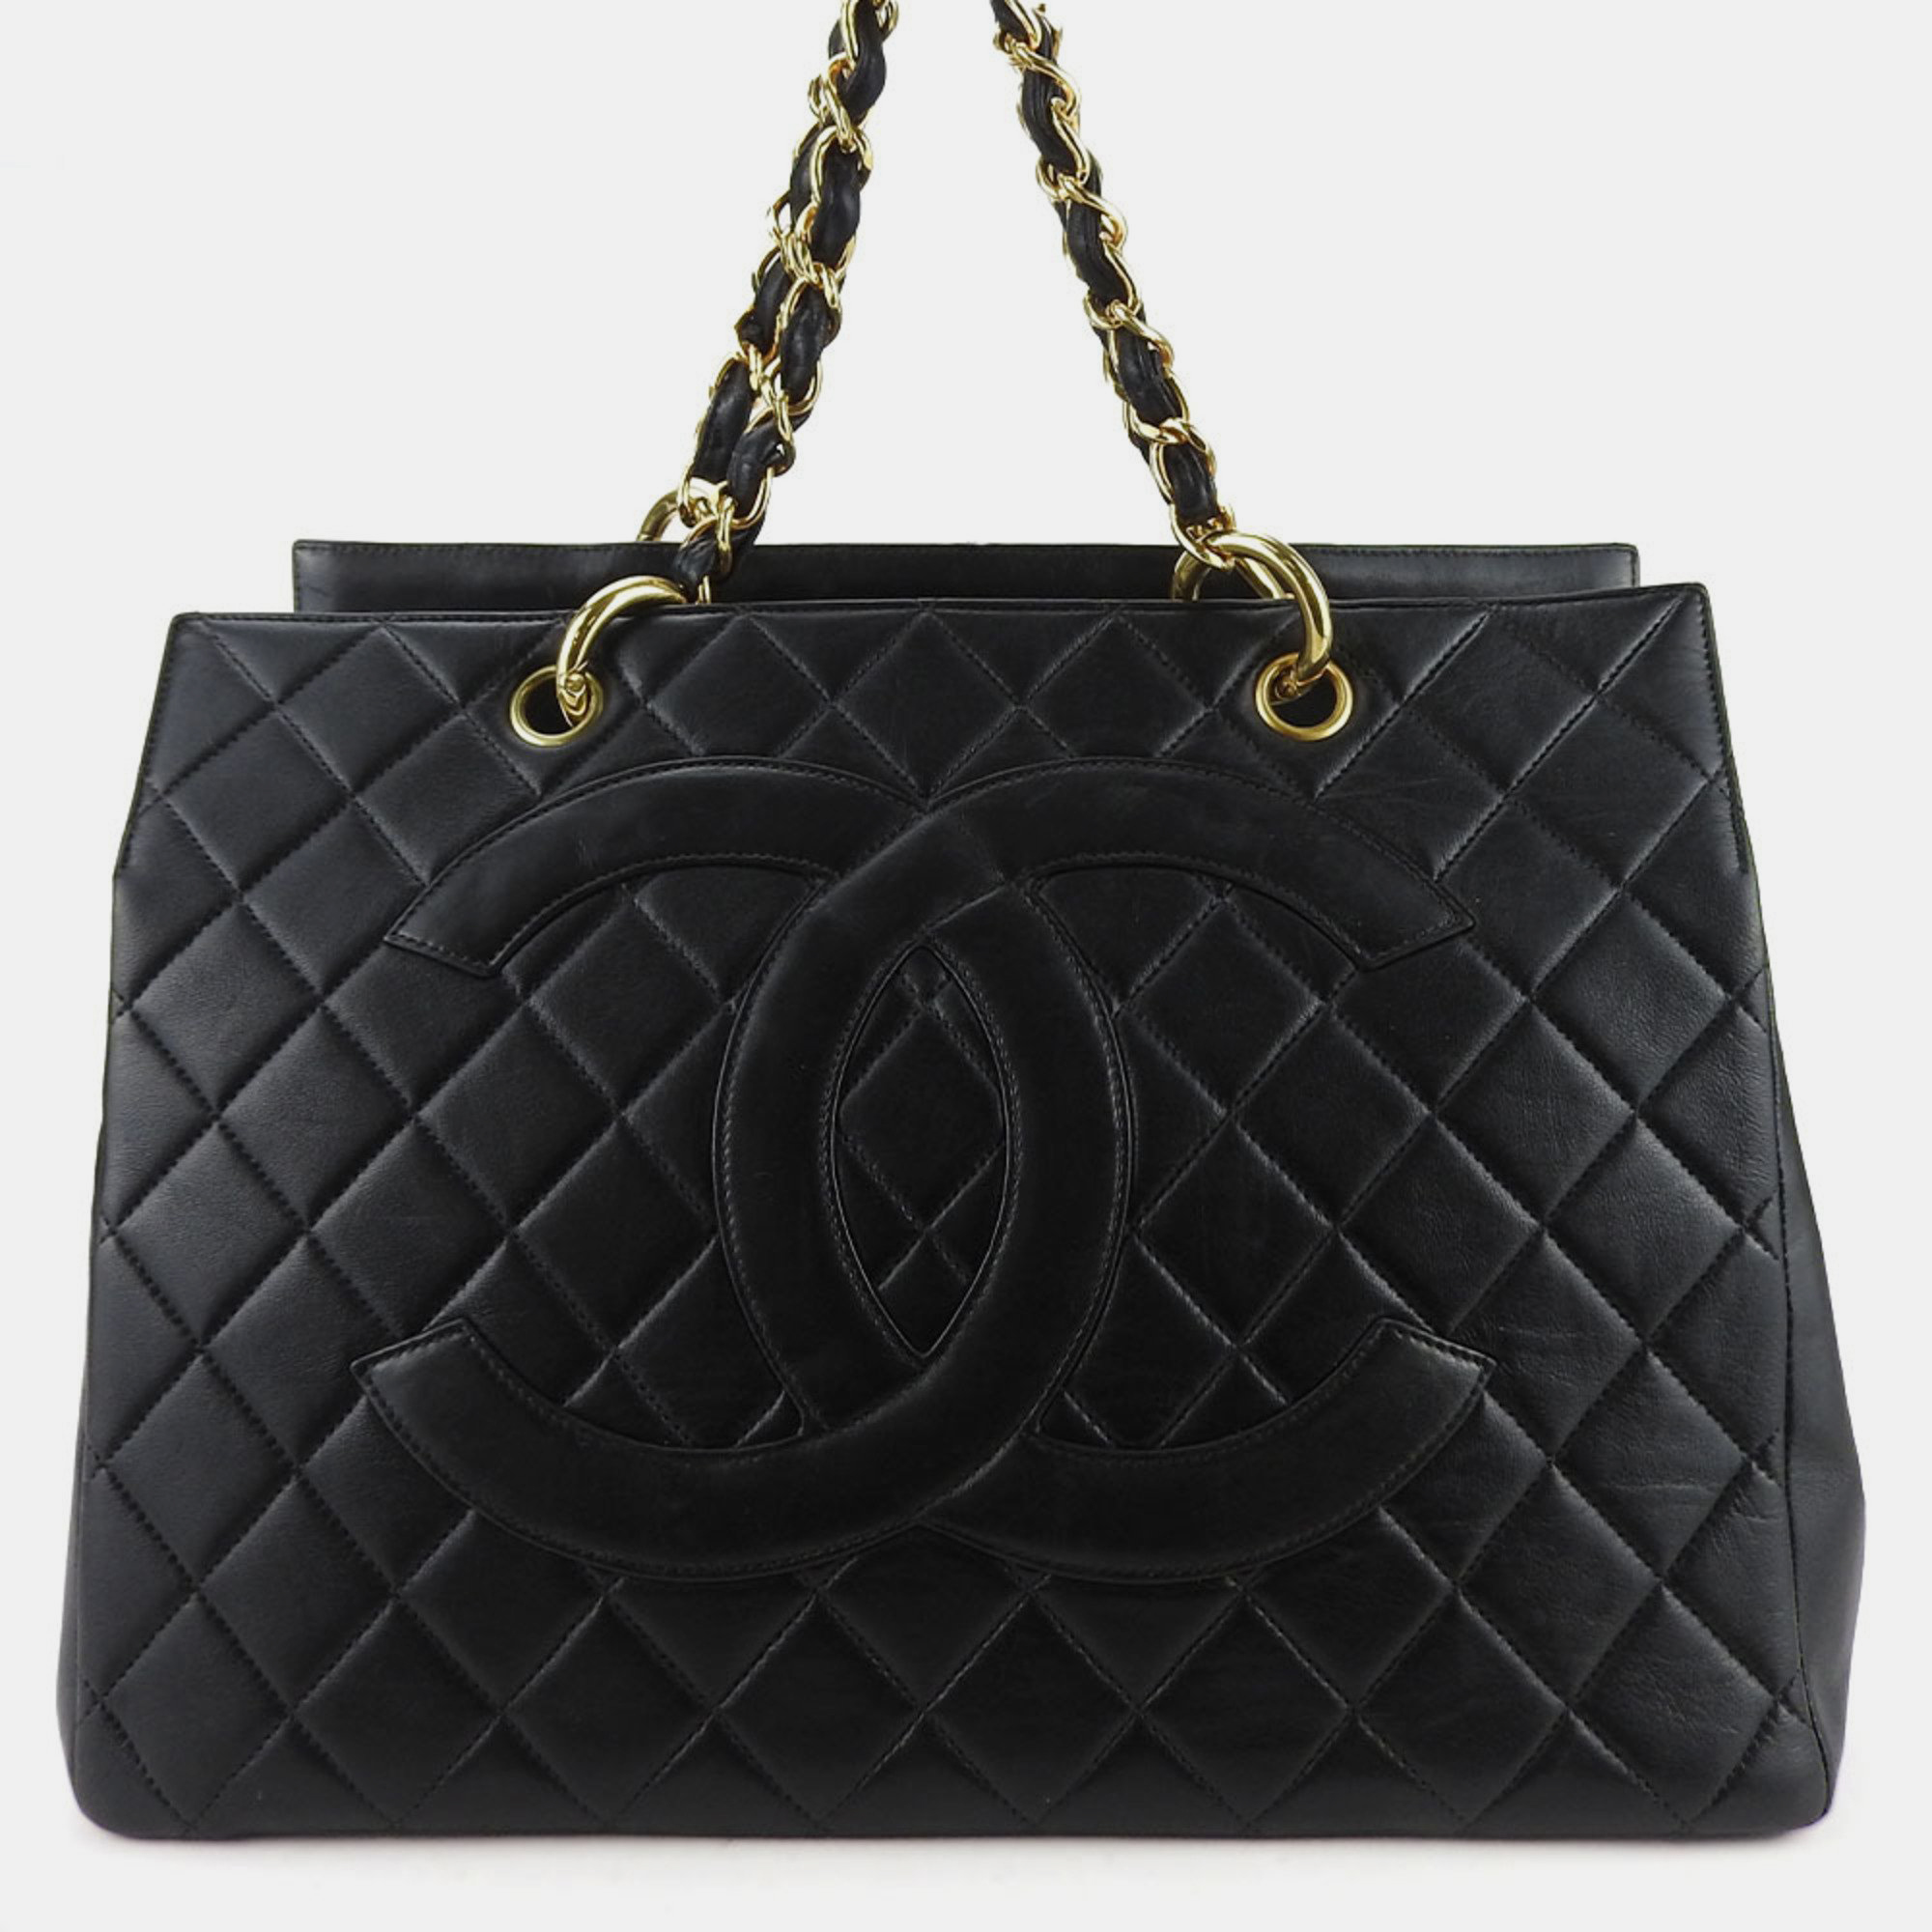 Chanel black leather grand shopping tote bag